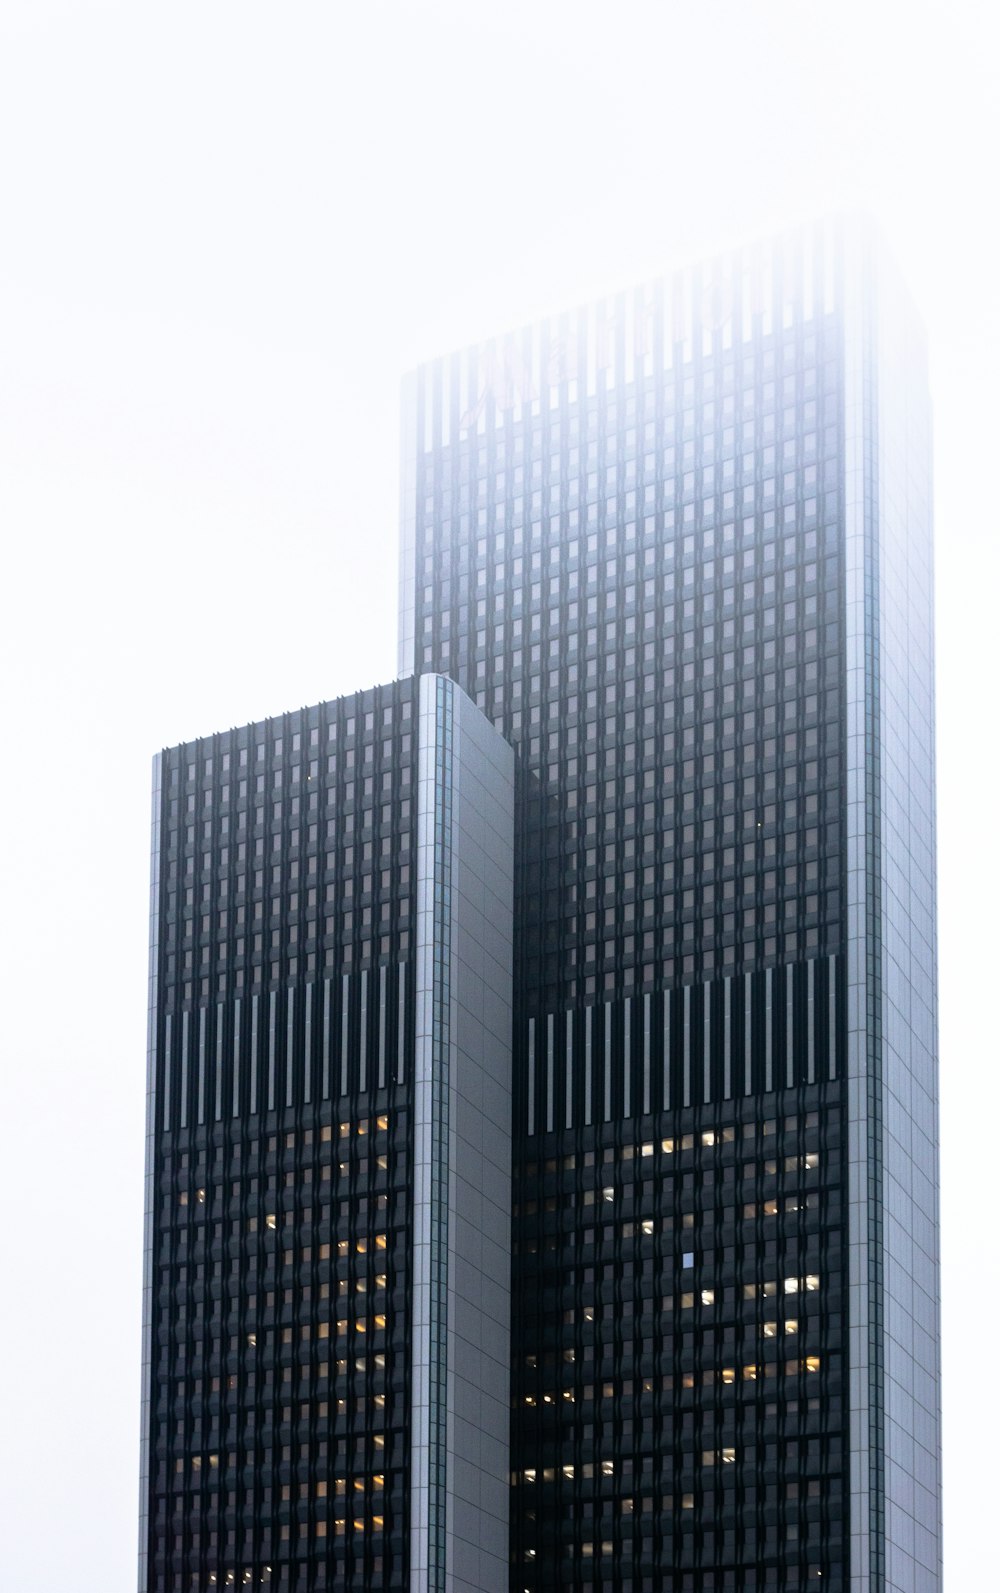 two high-rise buildings